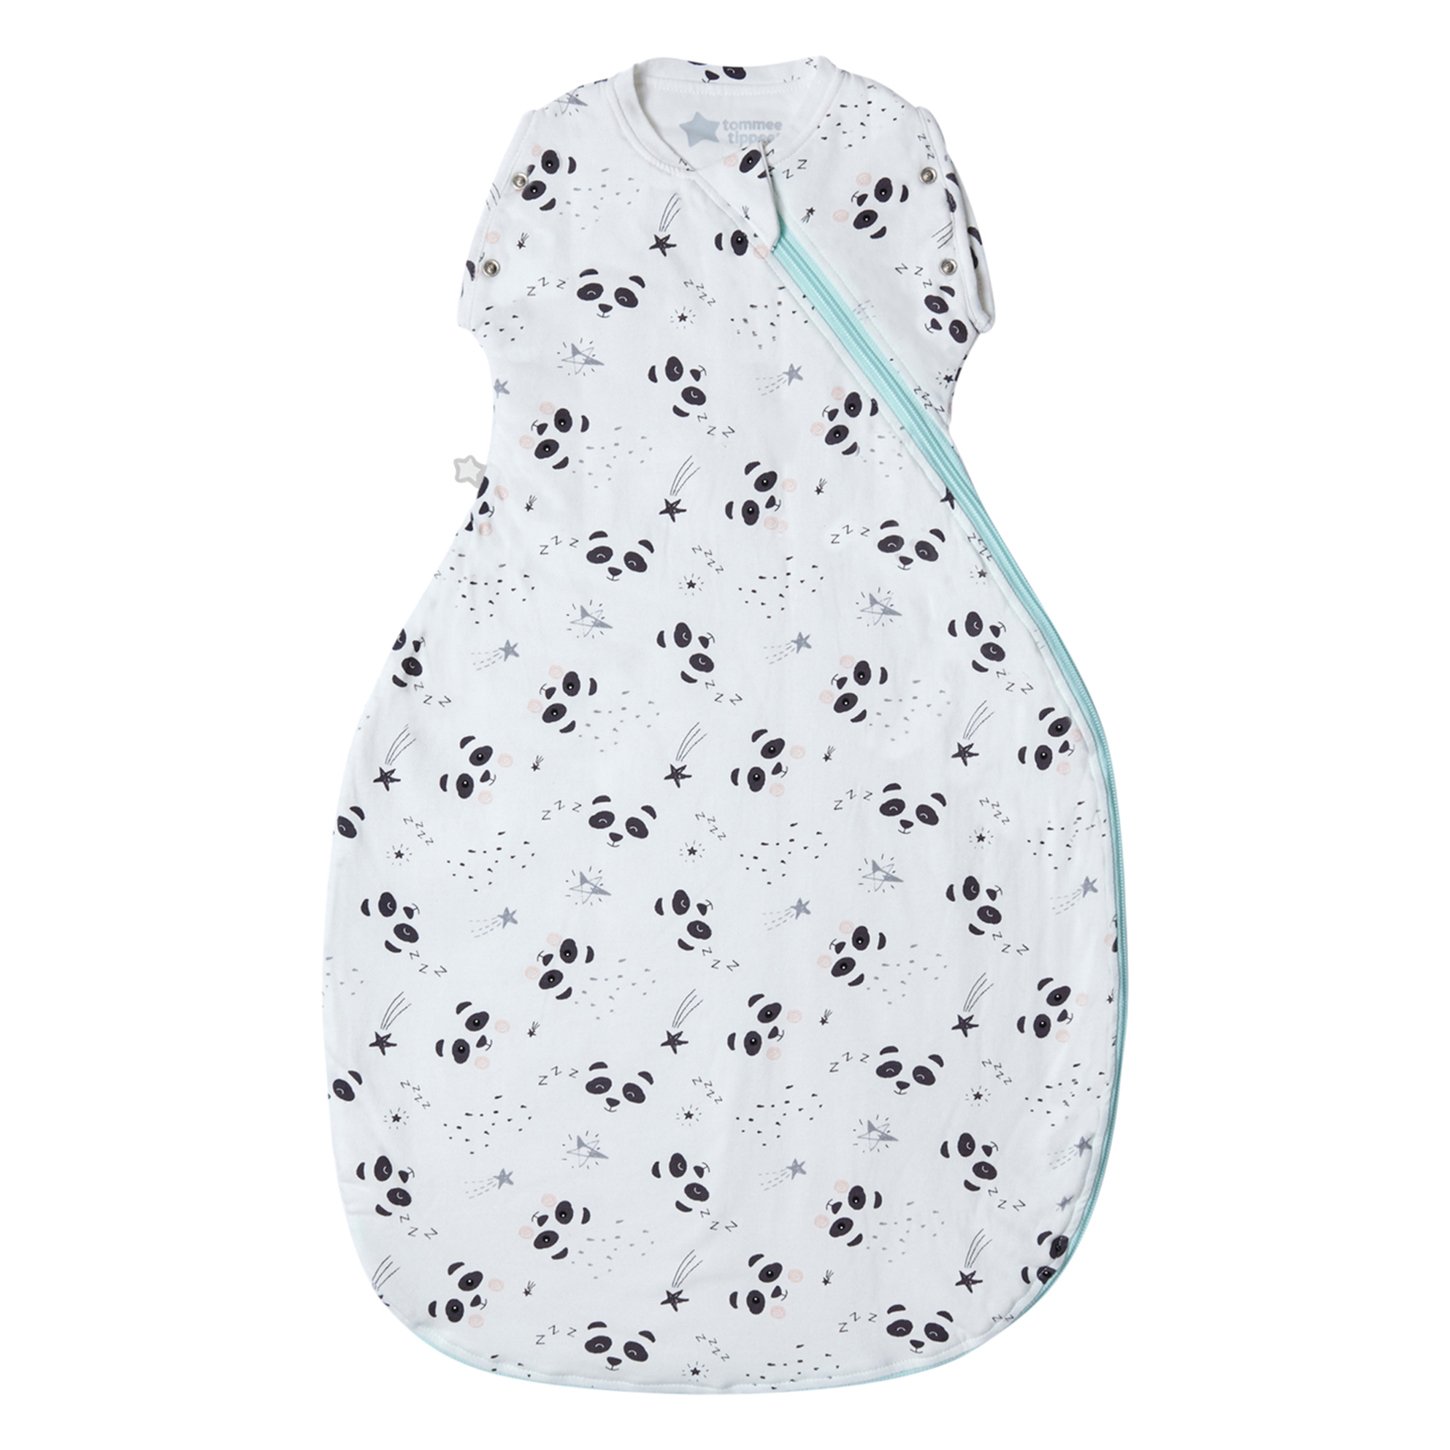 Tommee Tippee Newborn Snuggle, 0-4m, 1.0 Tog, Little Pip Review